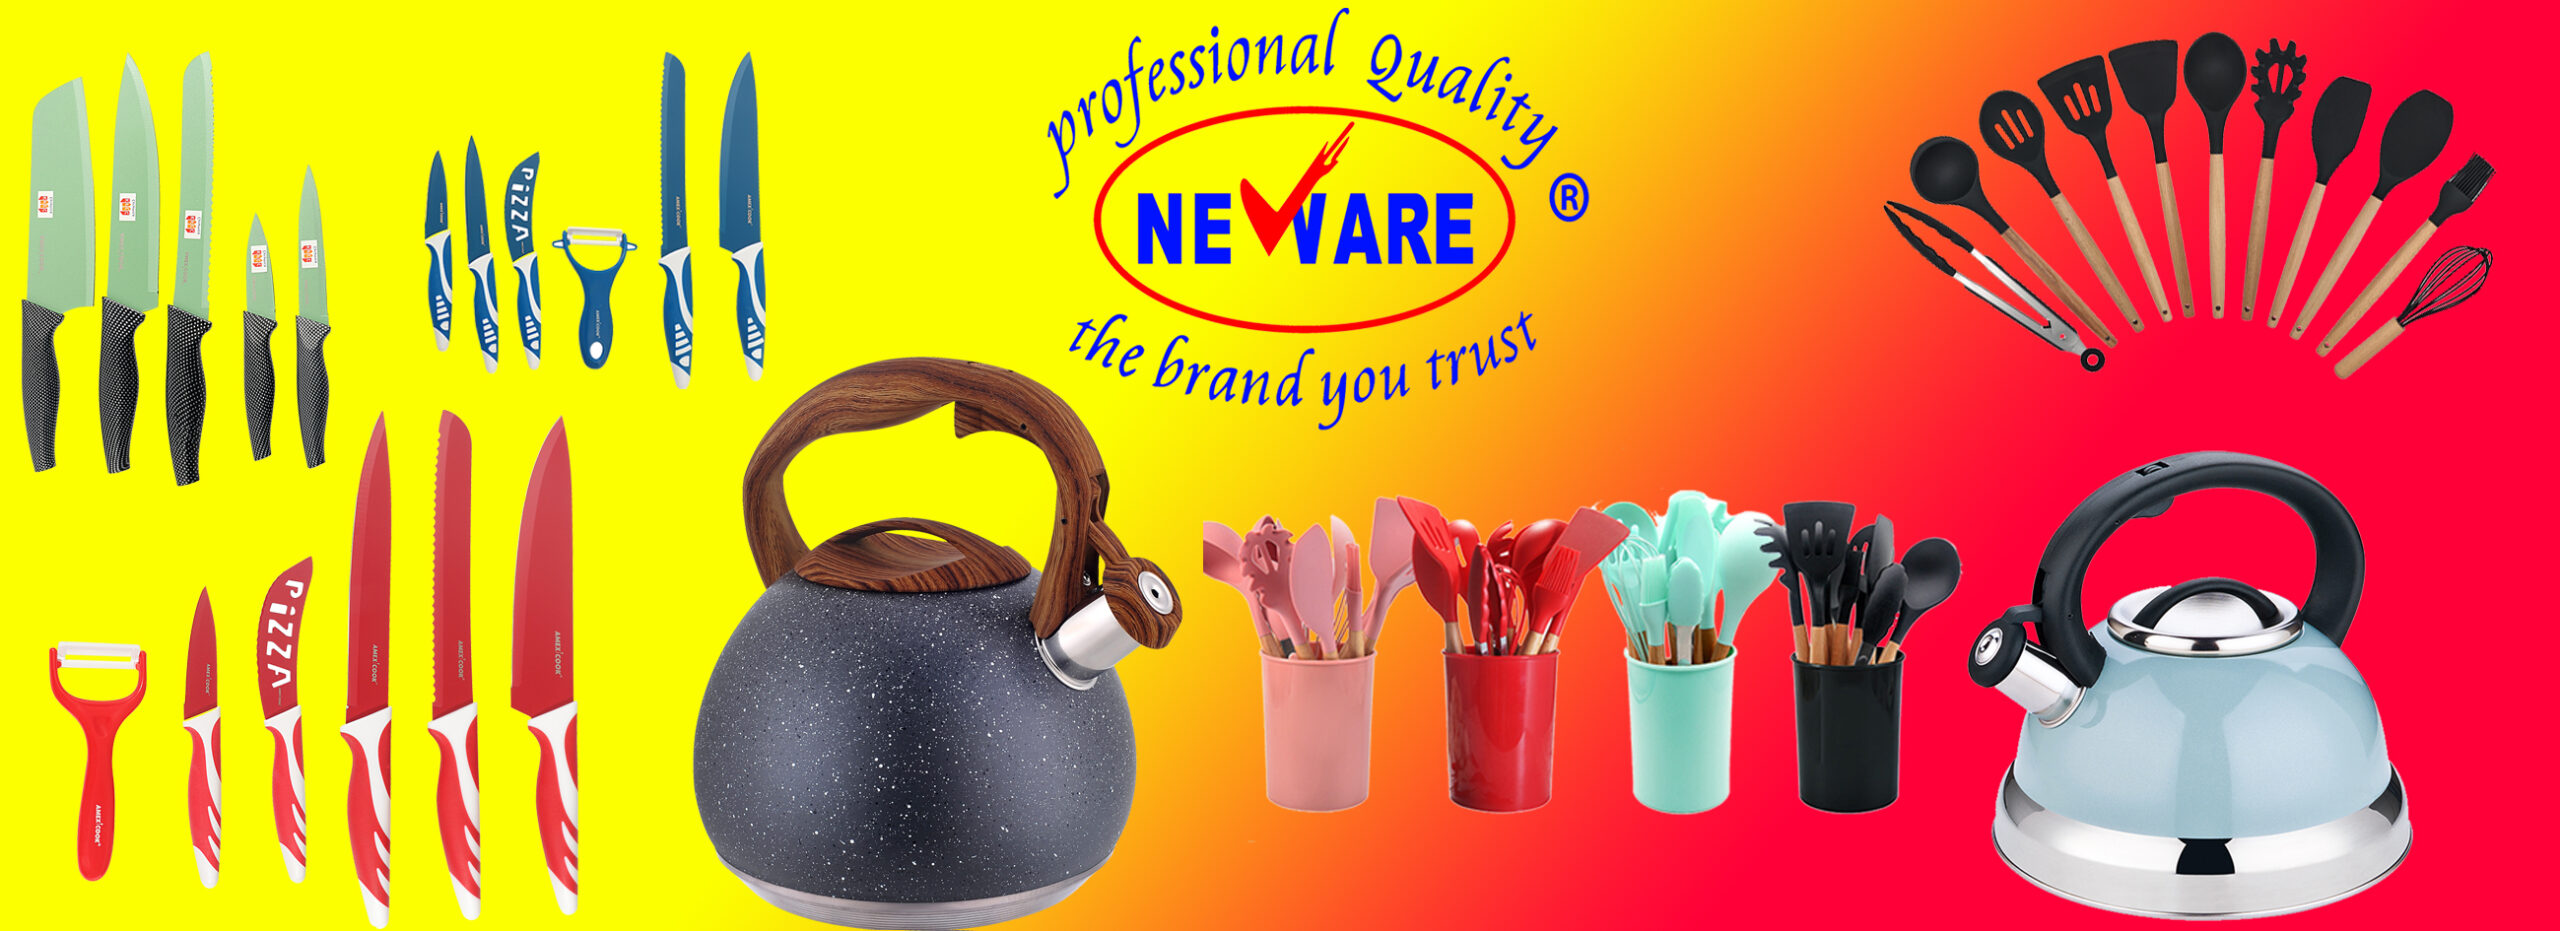 Neware Forged 10 Pcs Cookware Set Amexicook available Yellow Color